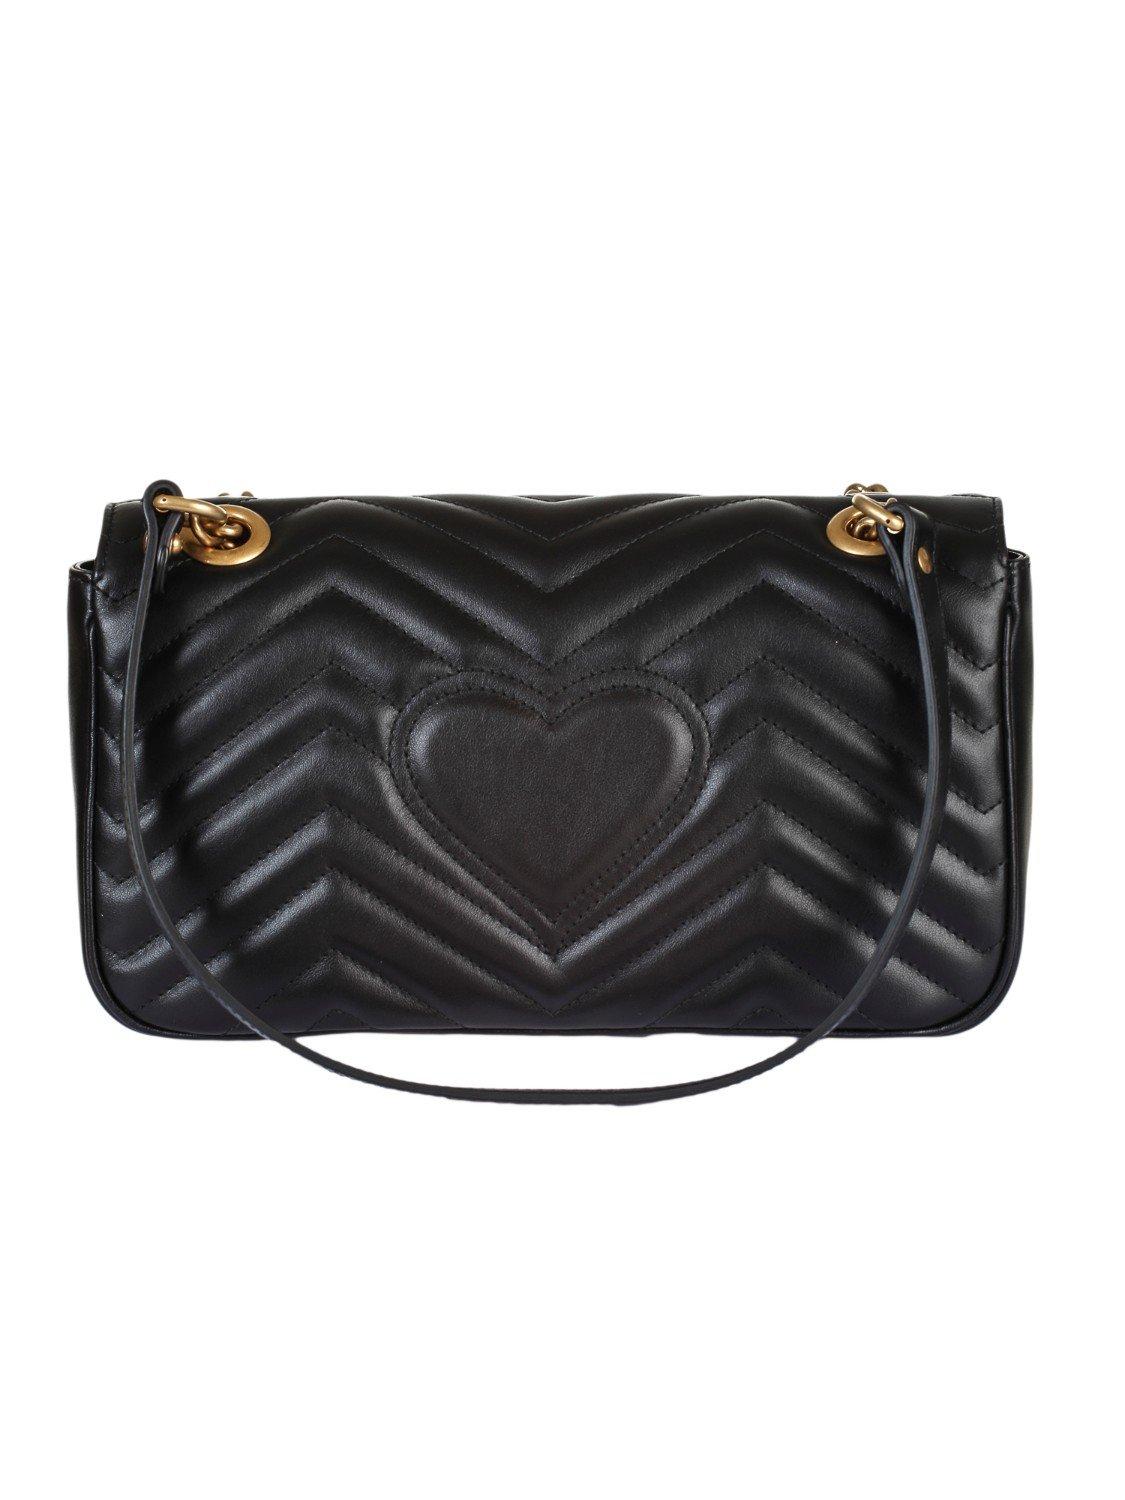 Gucci Bag With Heart On The Back Online Offers, Save 46% | jlcatj.gob.mx